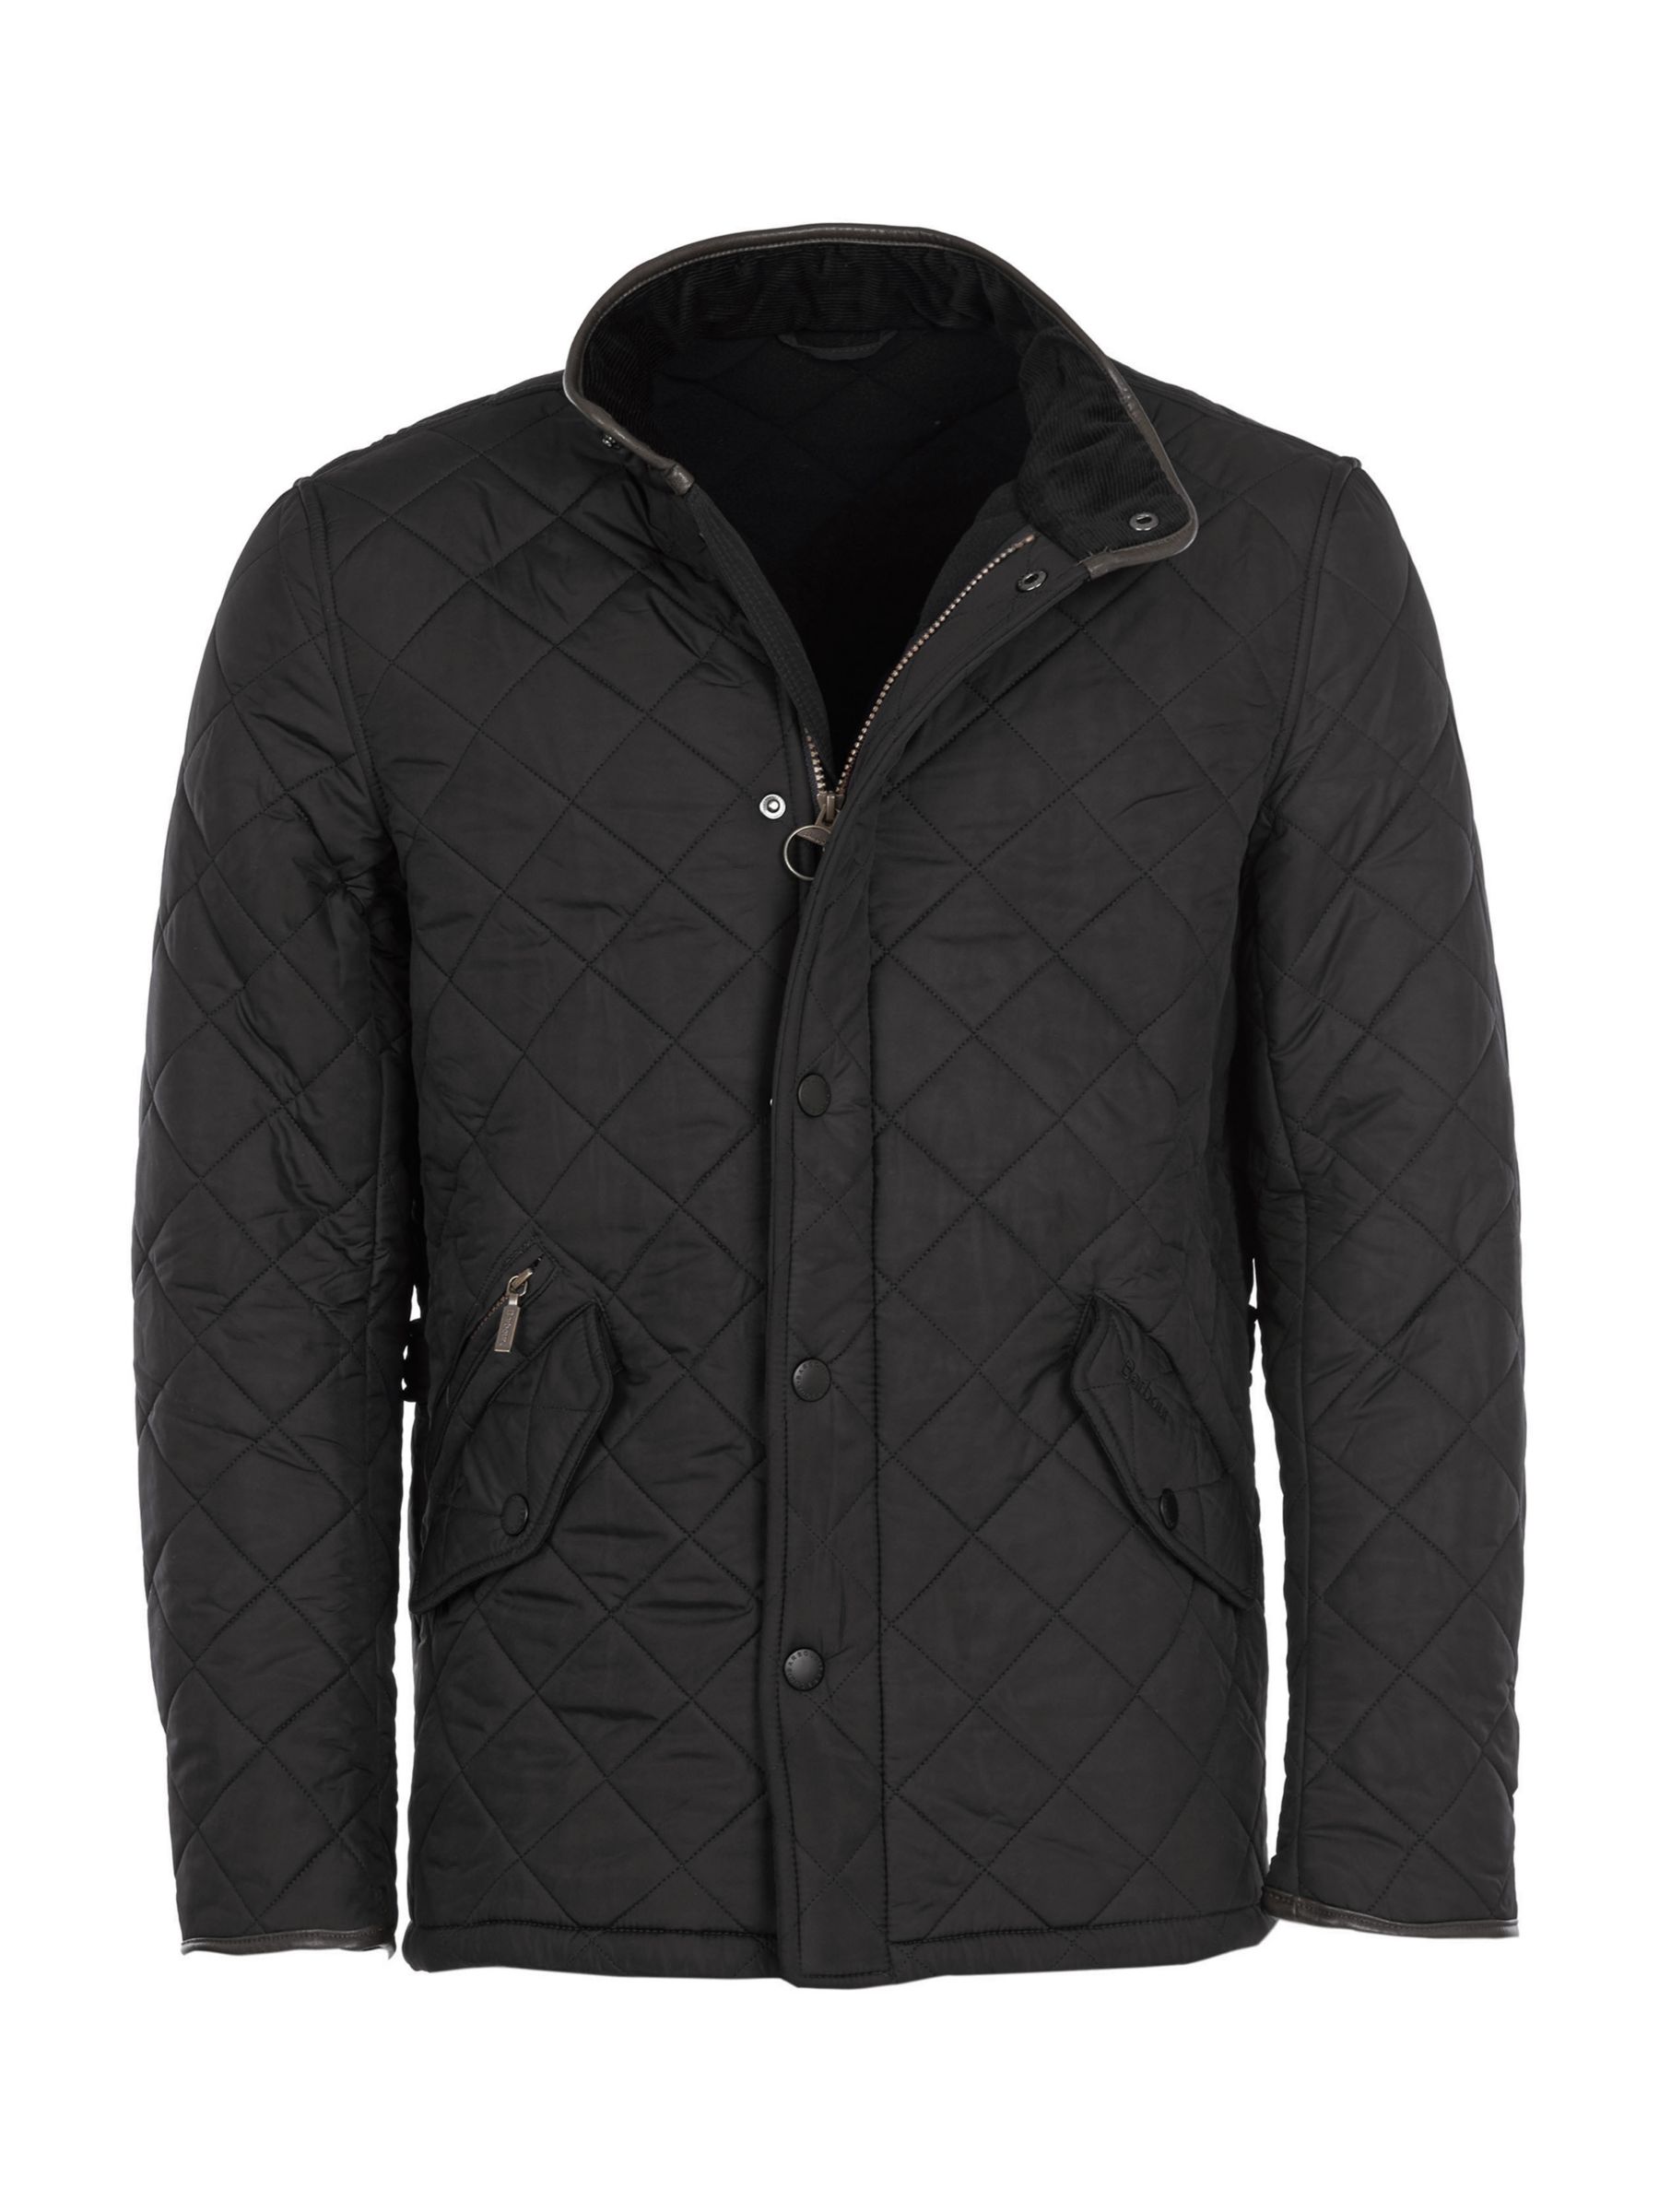 Barbour Lifestyle Powell Quilted Jacket, Black at John Lewis & Partners